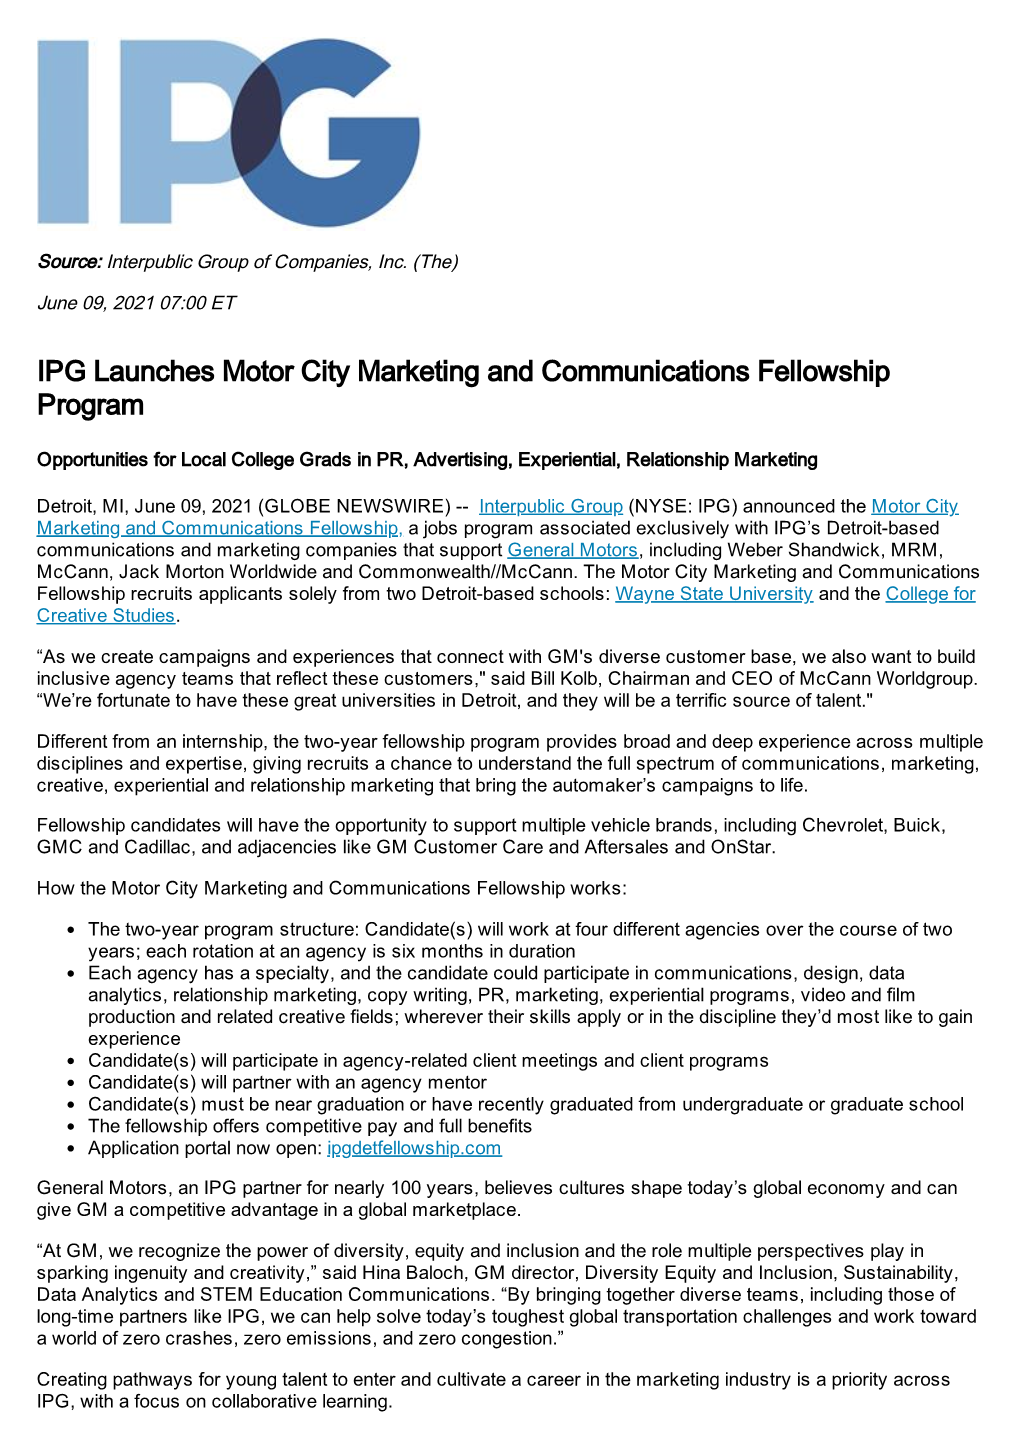 IPG Launches Motor City Marketing and Communications Fellowship Program